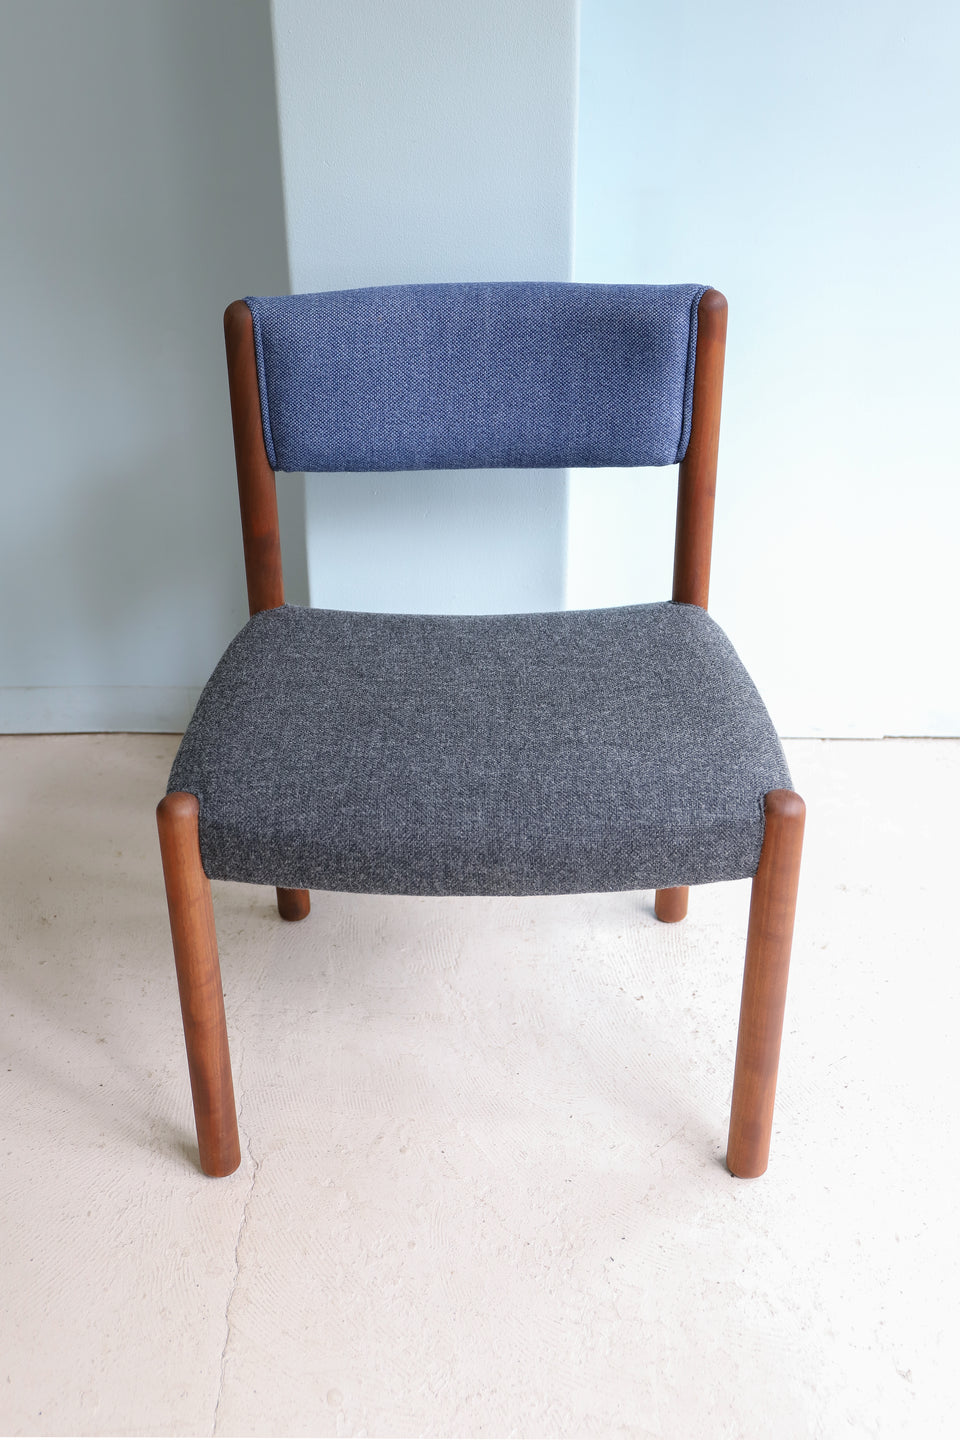 Japanese Vintage Dining Chair Scandinavian Design/ジャパンヴィンテージ ダイニングチェア 椅子 北欧デザイン